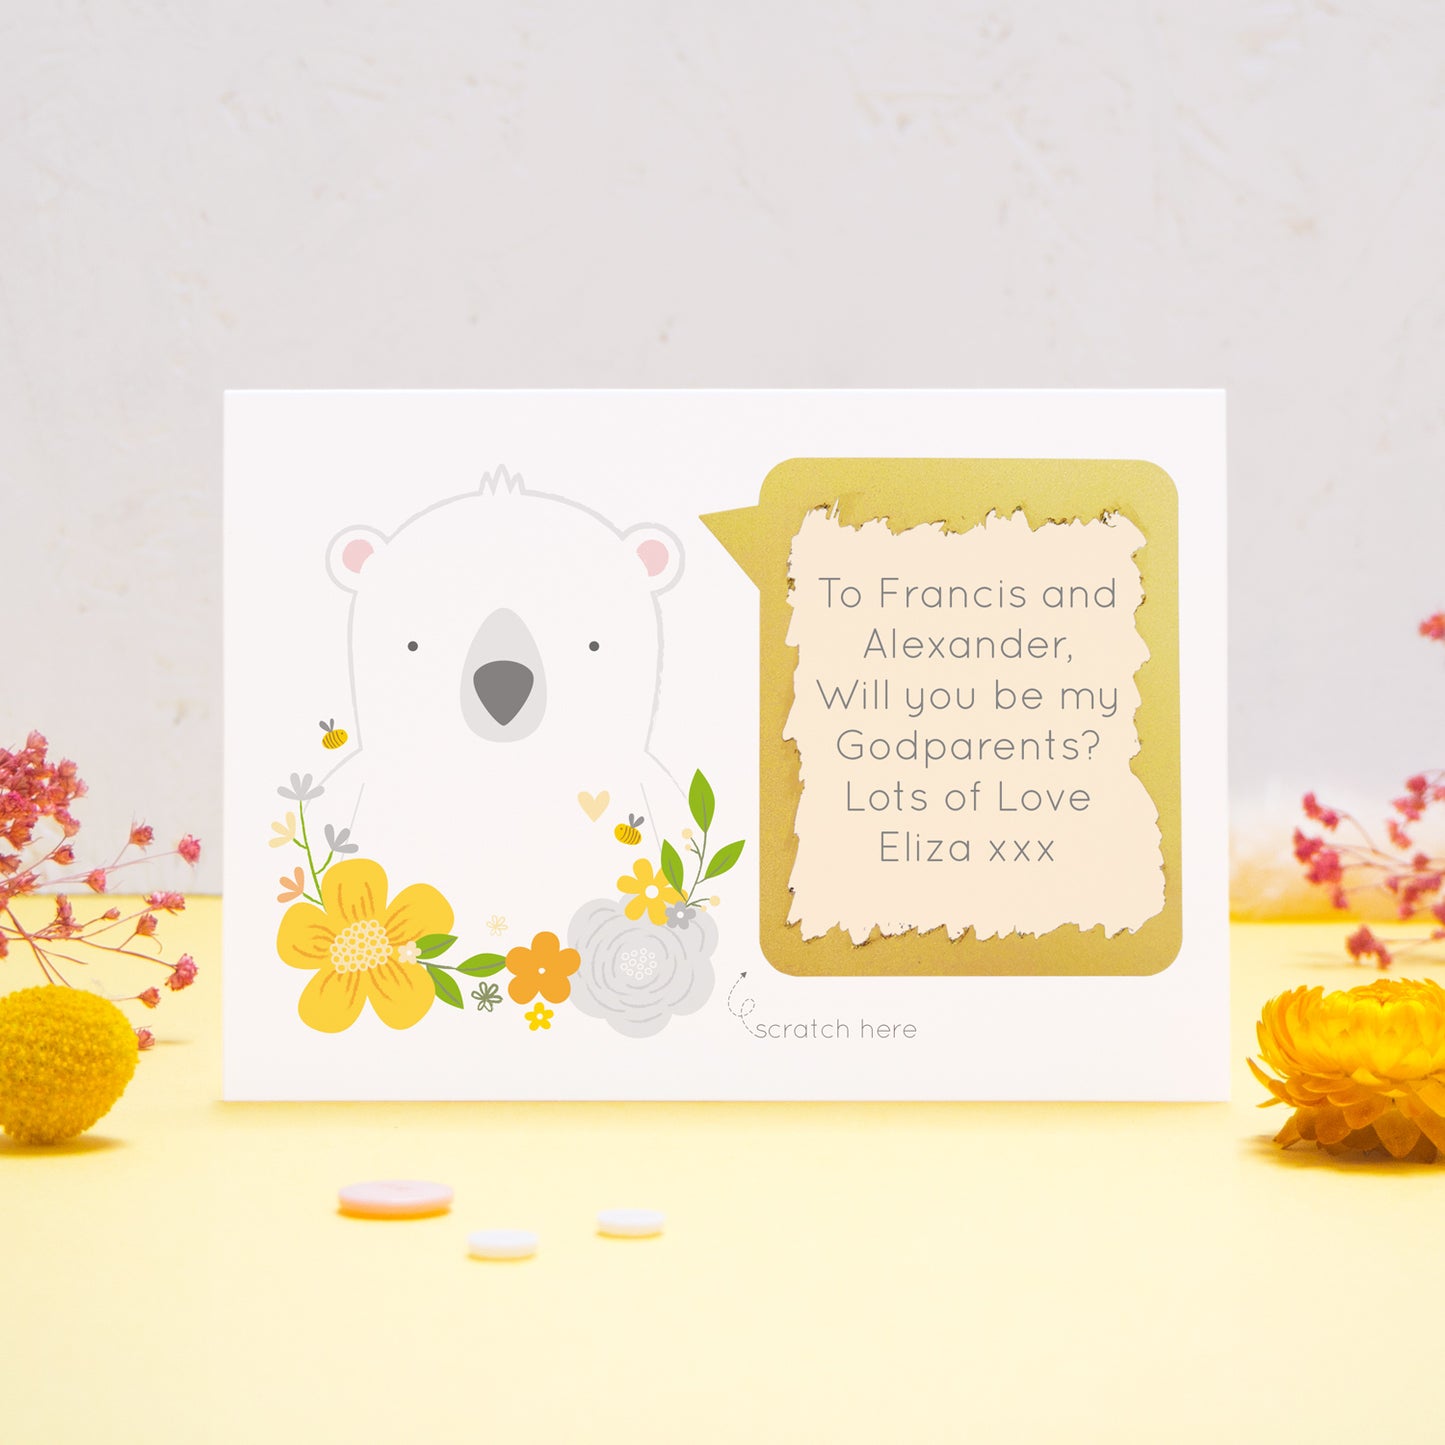 A personalised will you be my godparents scratch card featuring a white bear, yellow flowers and a peach text box. This has been shot on a yellow and grey background with flowers. The gold panel has been scratched away to reveal the message.